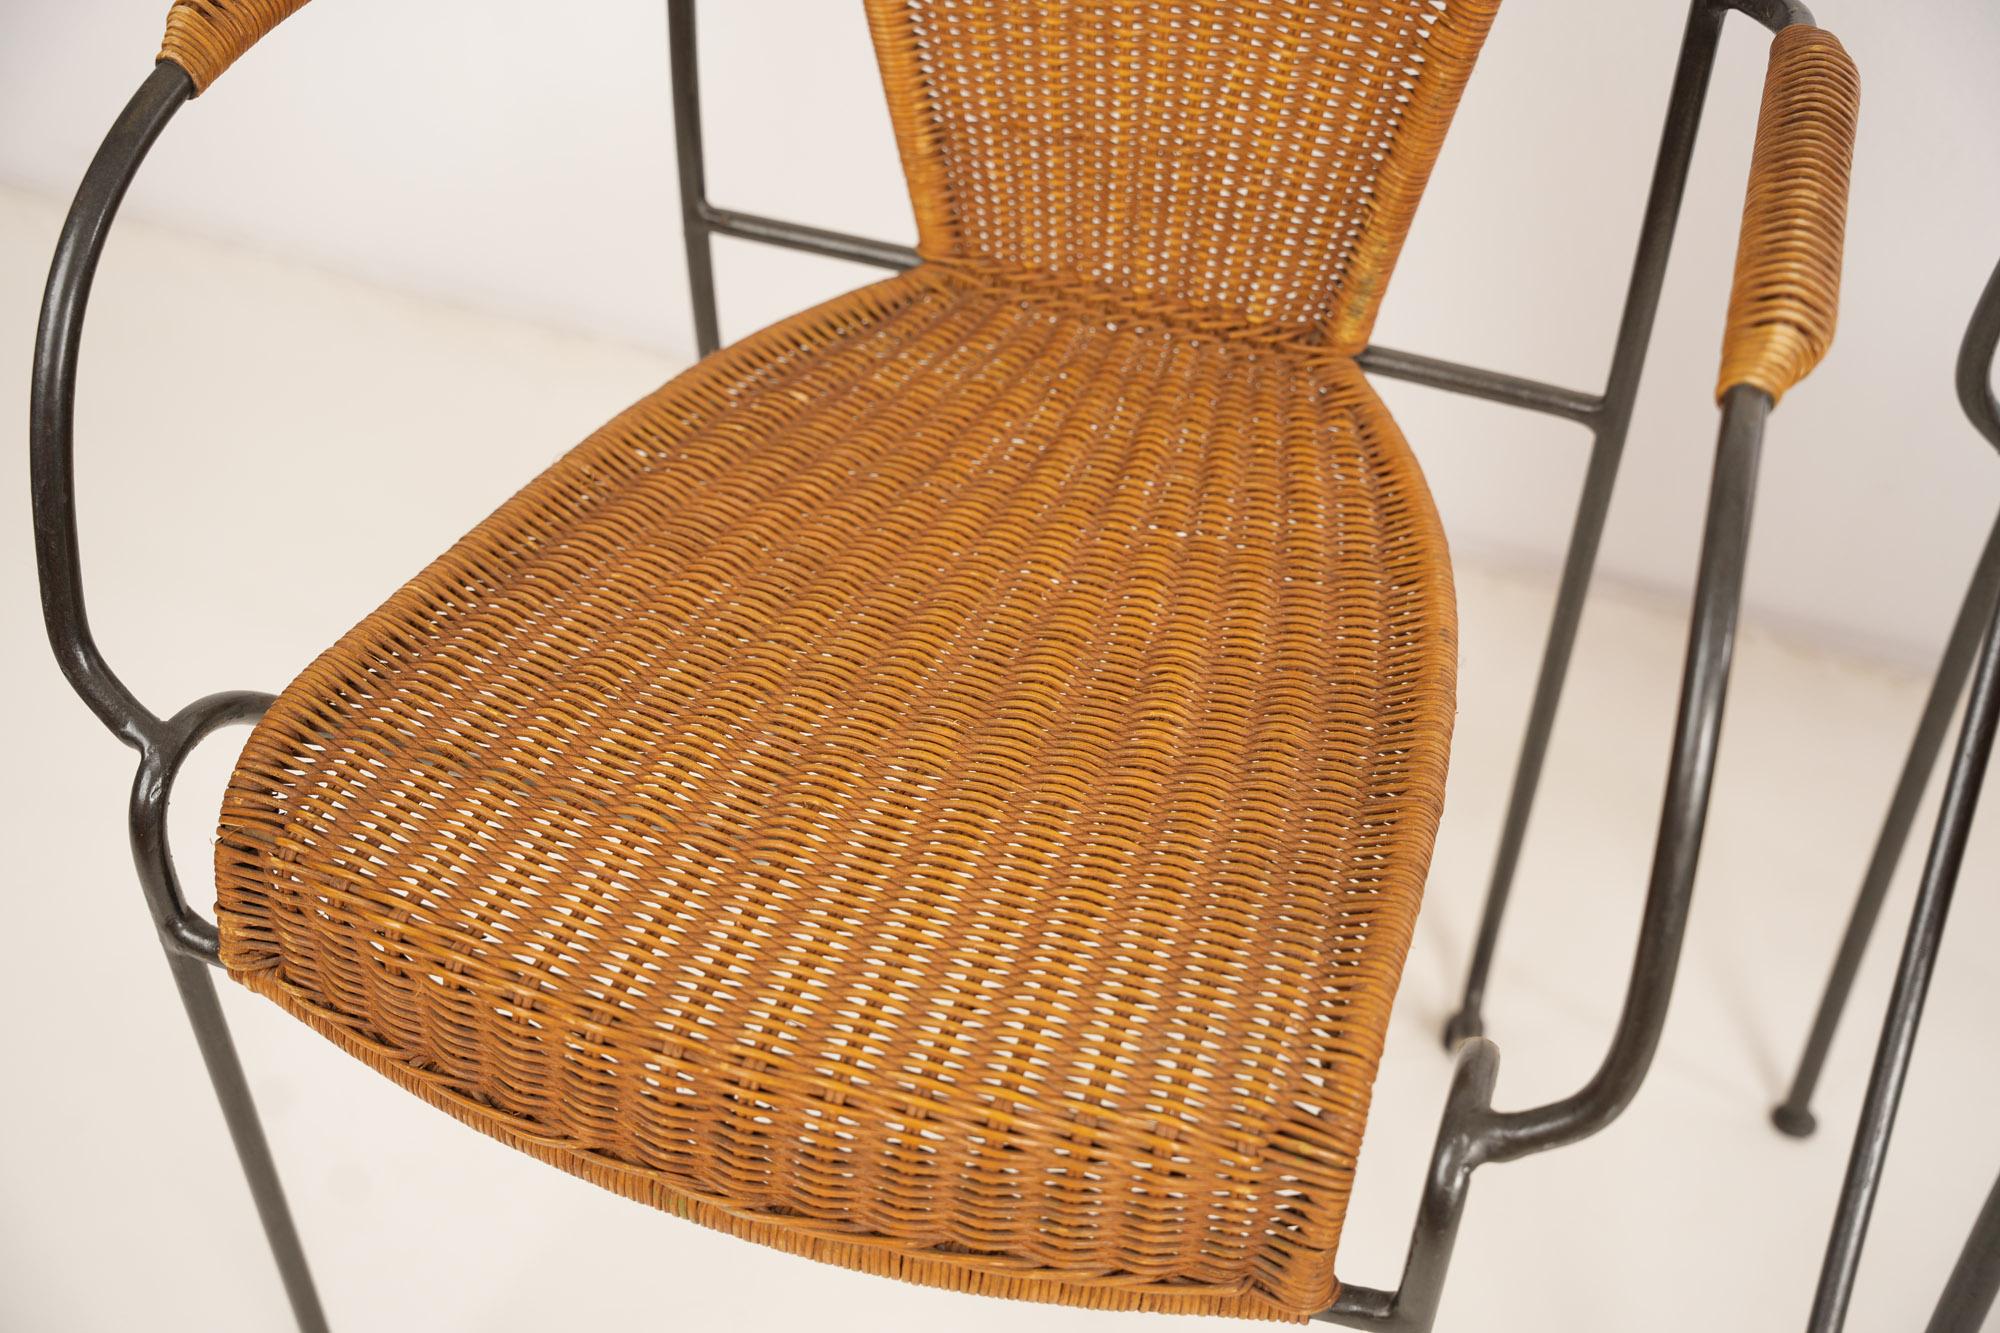 Set of Four Wicker and Iron Chair By Frederic Weinberg 1950s For Sale 1